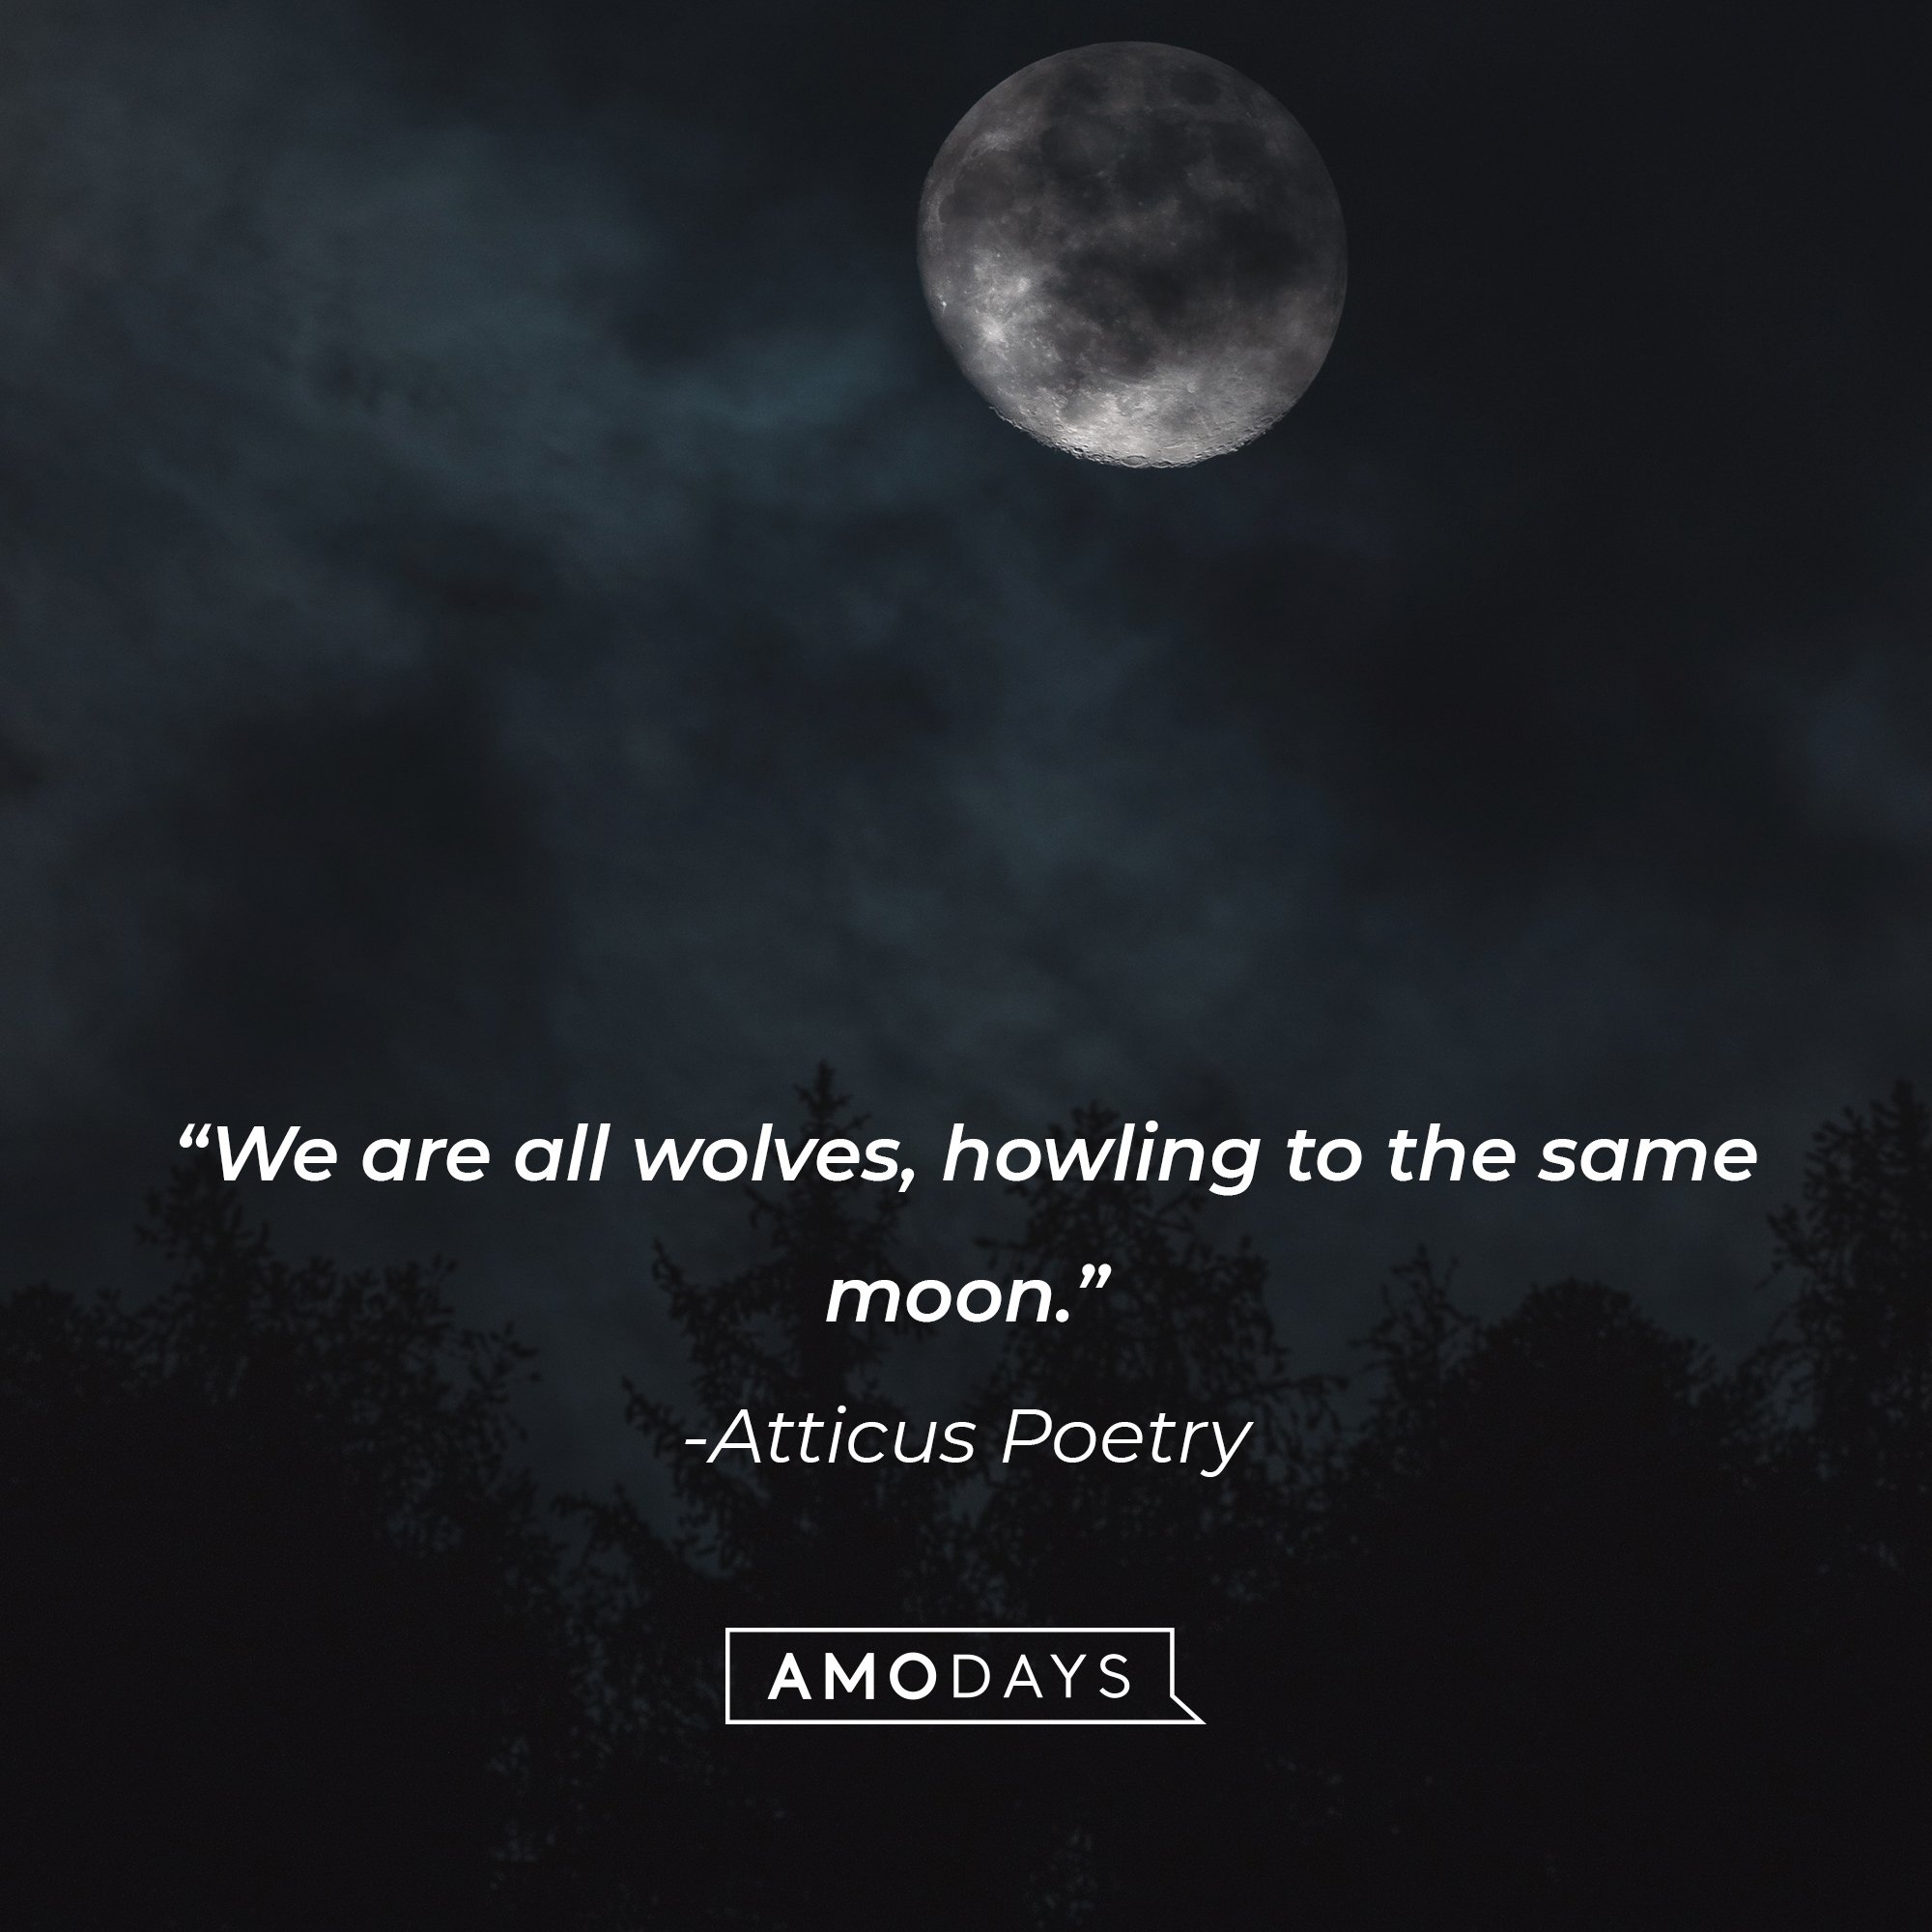 Atticus Poetry's quote: “We are all wolves, howling to the same moon.” | Image: AmoDays